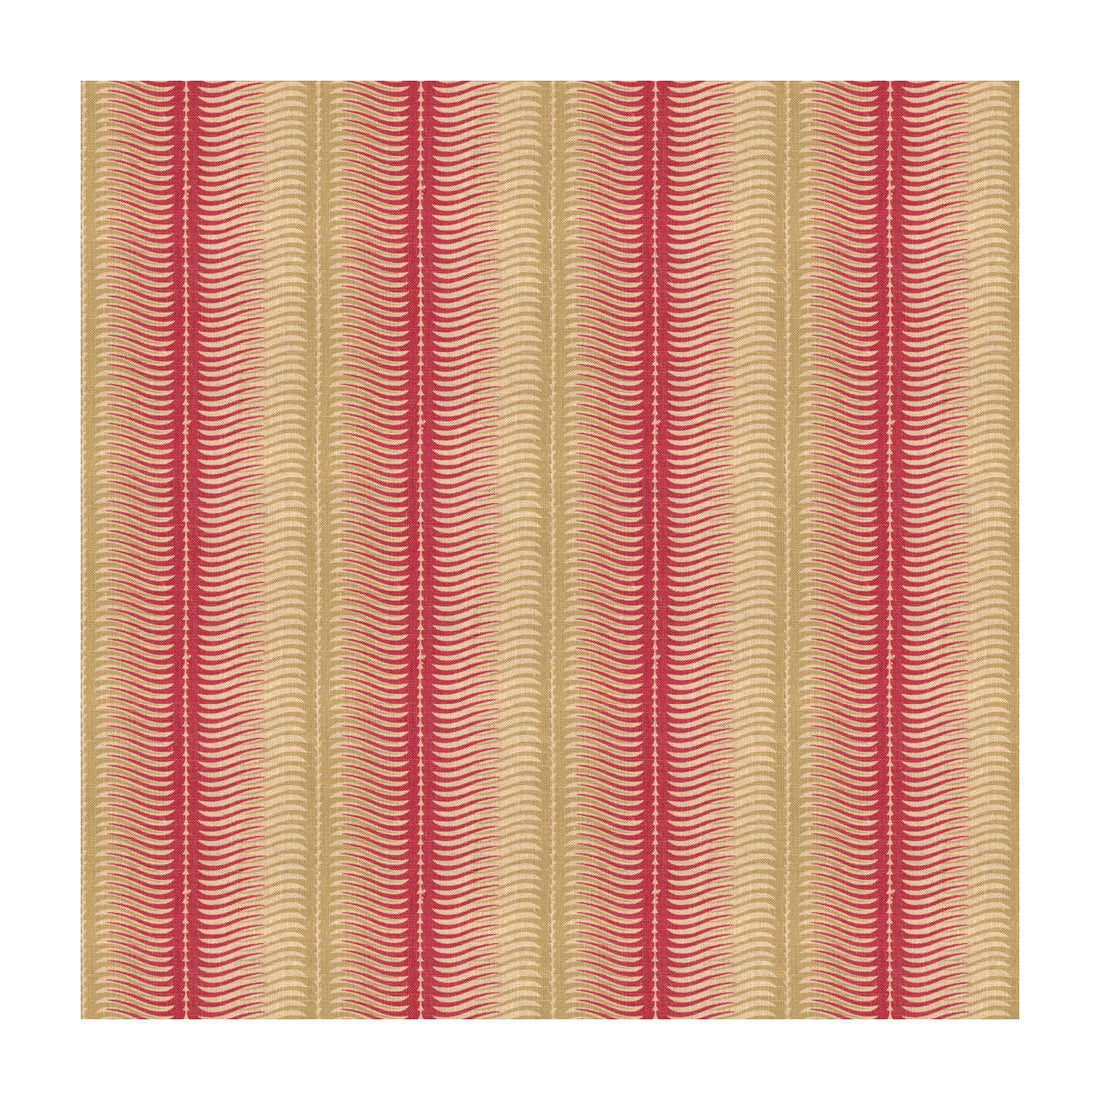 Stripes fabric in cerise color - pattern GWF-3509.7.0 - by Lee Jofa Modern in the Allegra Hicks Garden collection